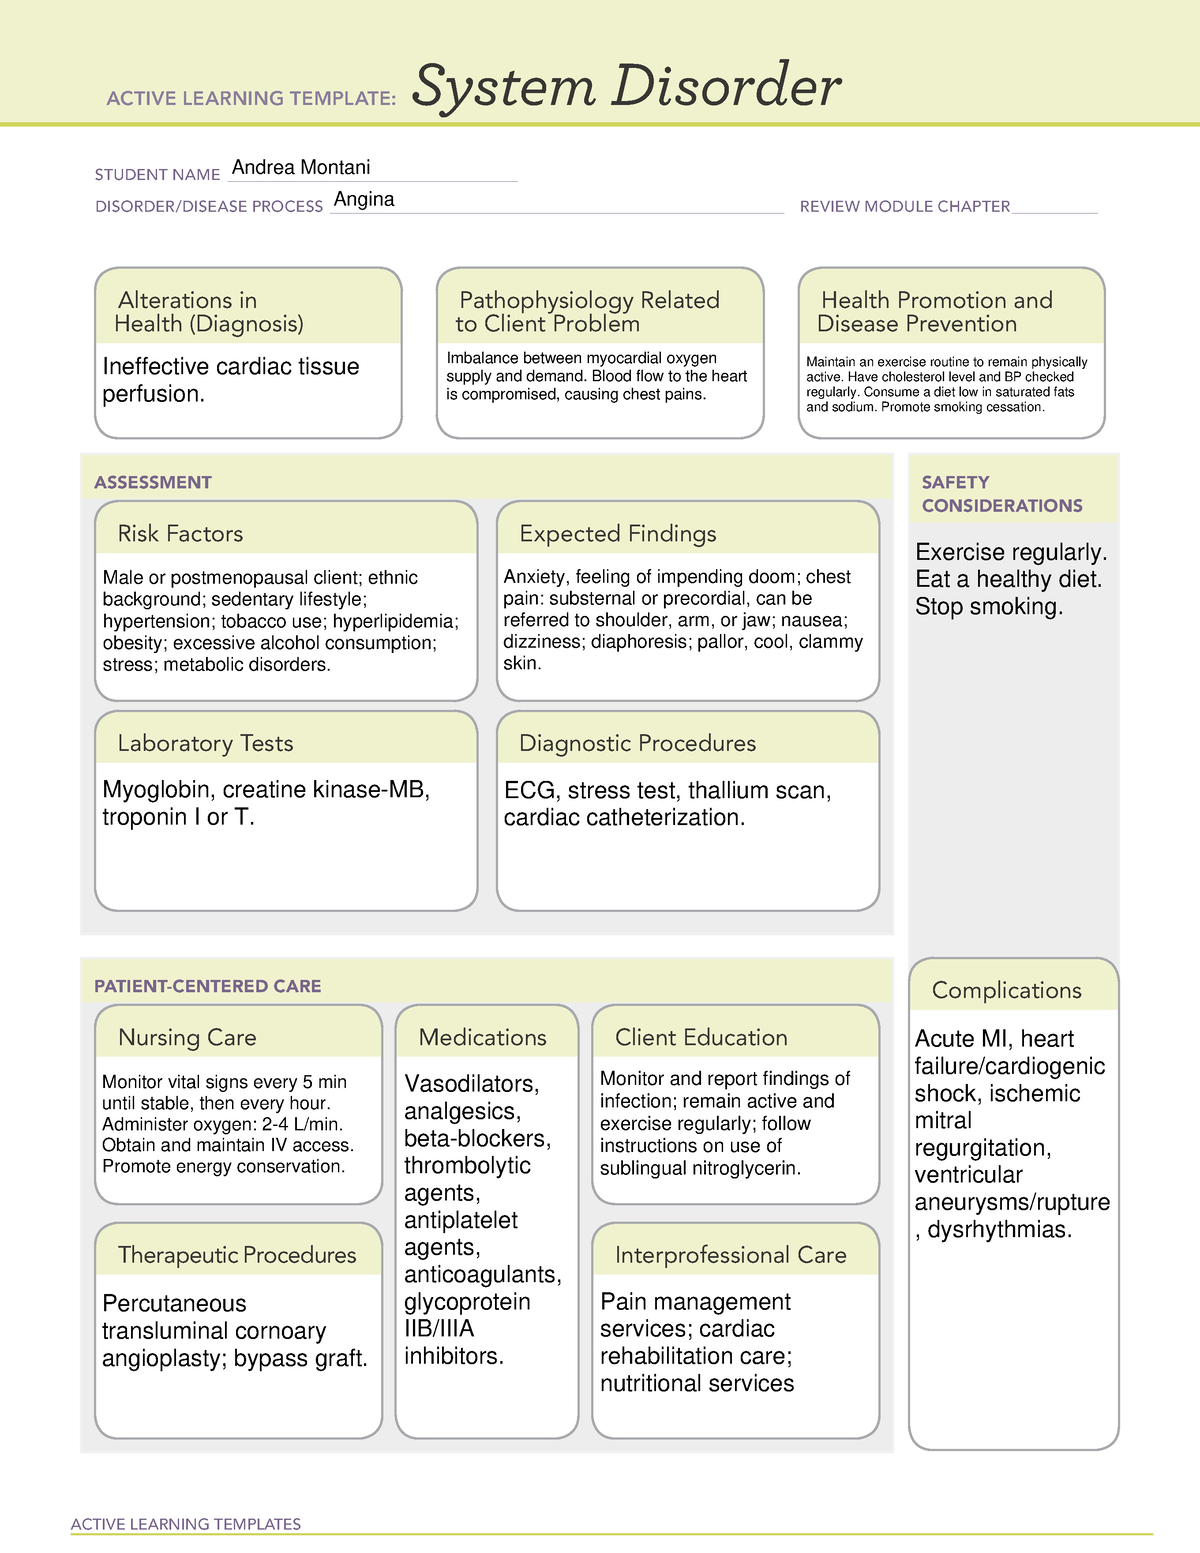 Case 4 - angina - coursework - ACTIVE LEARNING TEMPLATES System ...